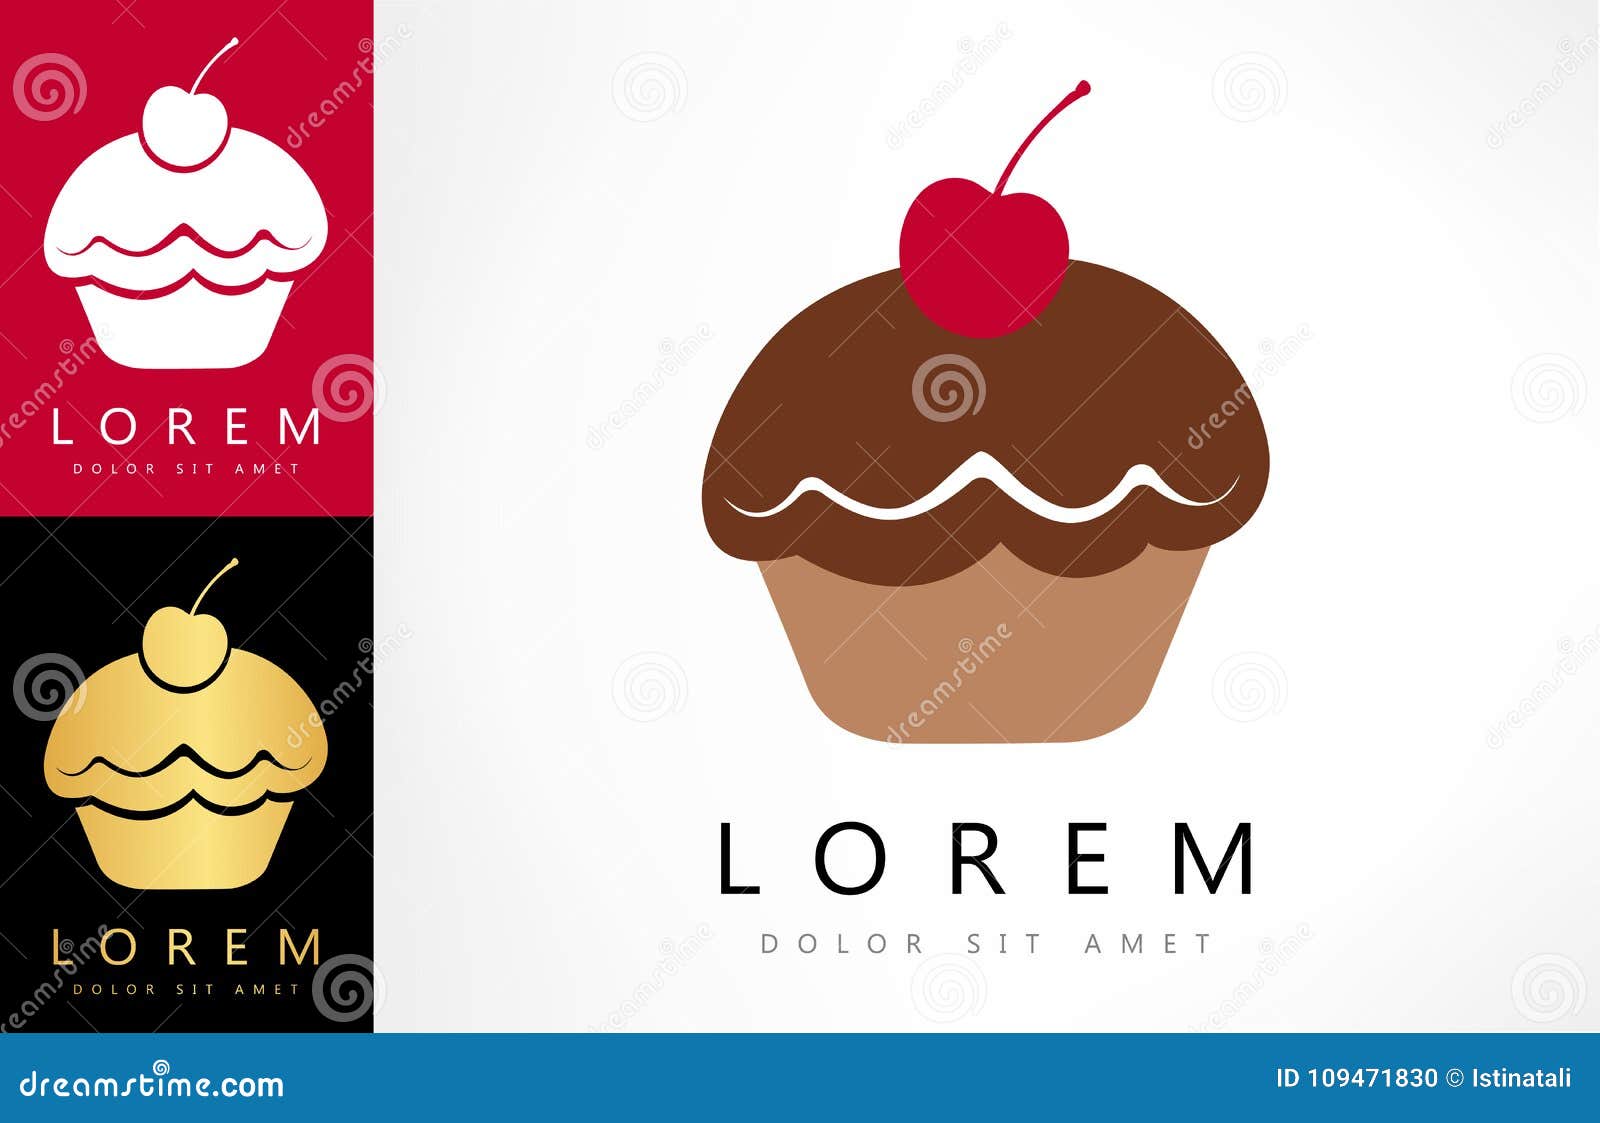 Cake with Cherry Logo Vector Stock Vector - Illustration of cherry ...